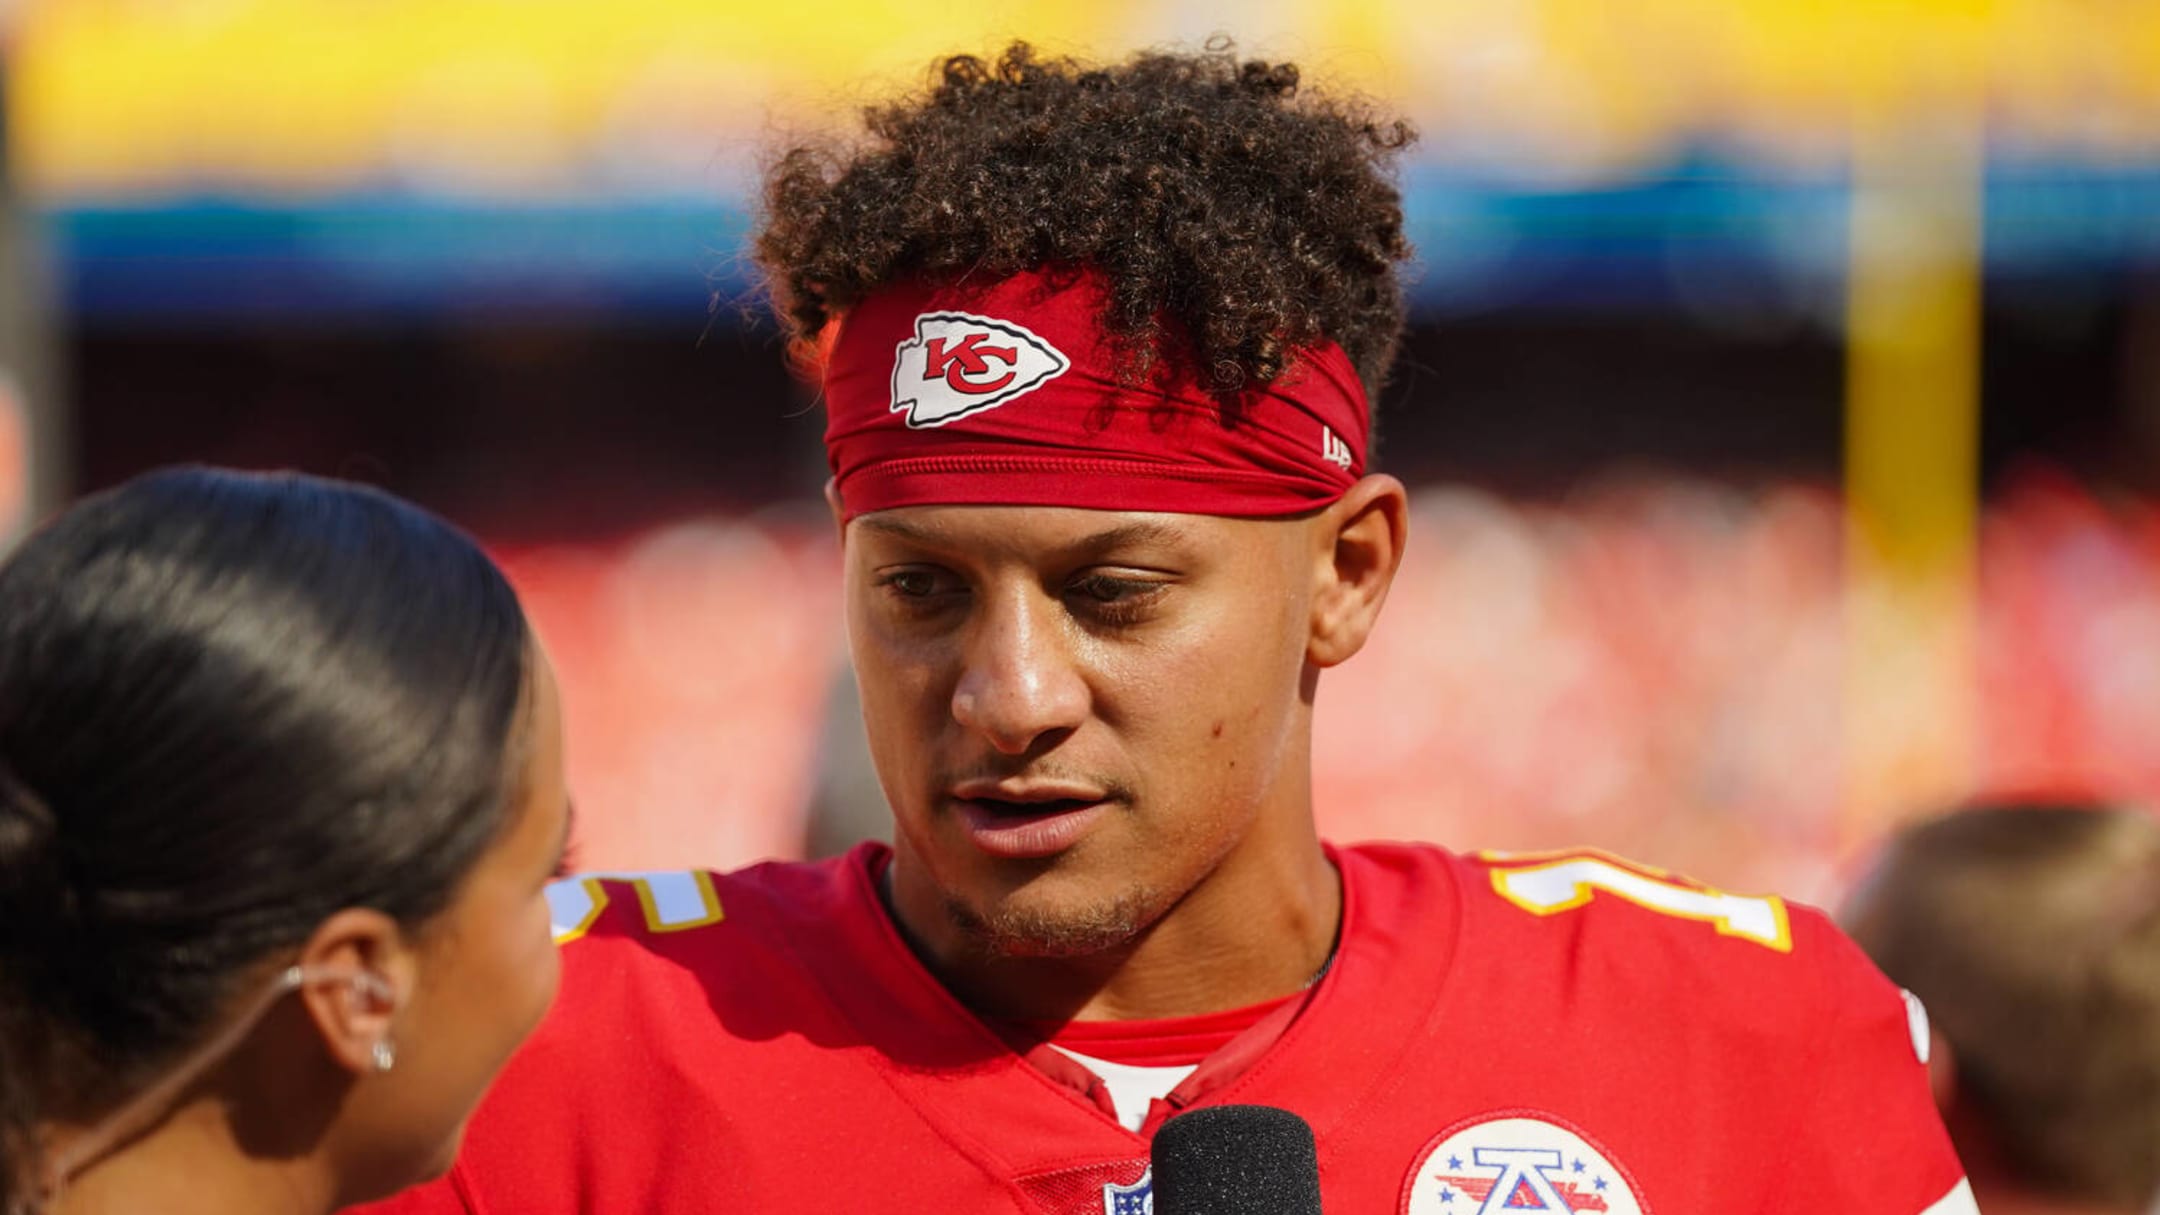 Texas Tech announces Mahomes' induction into Ring of Honor